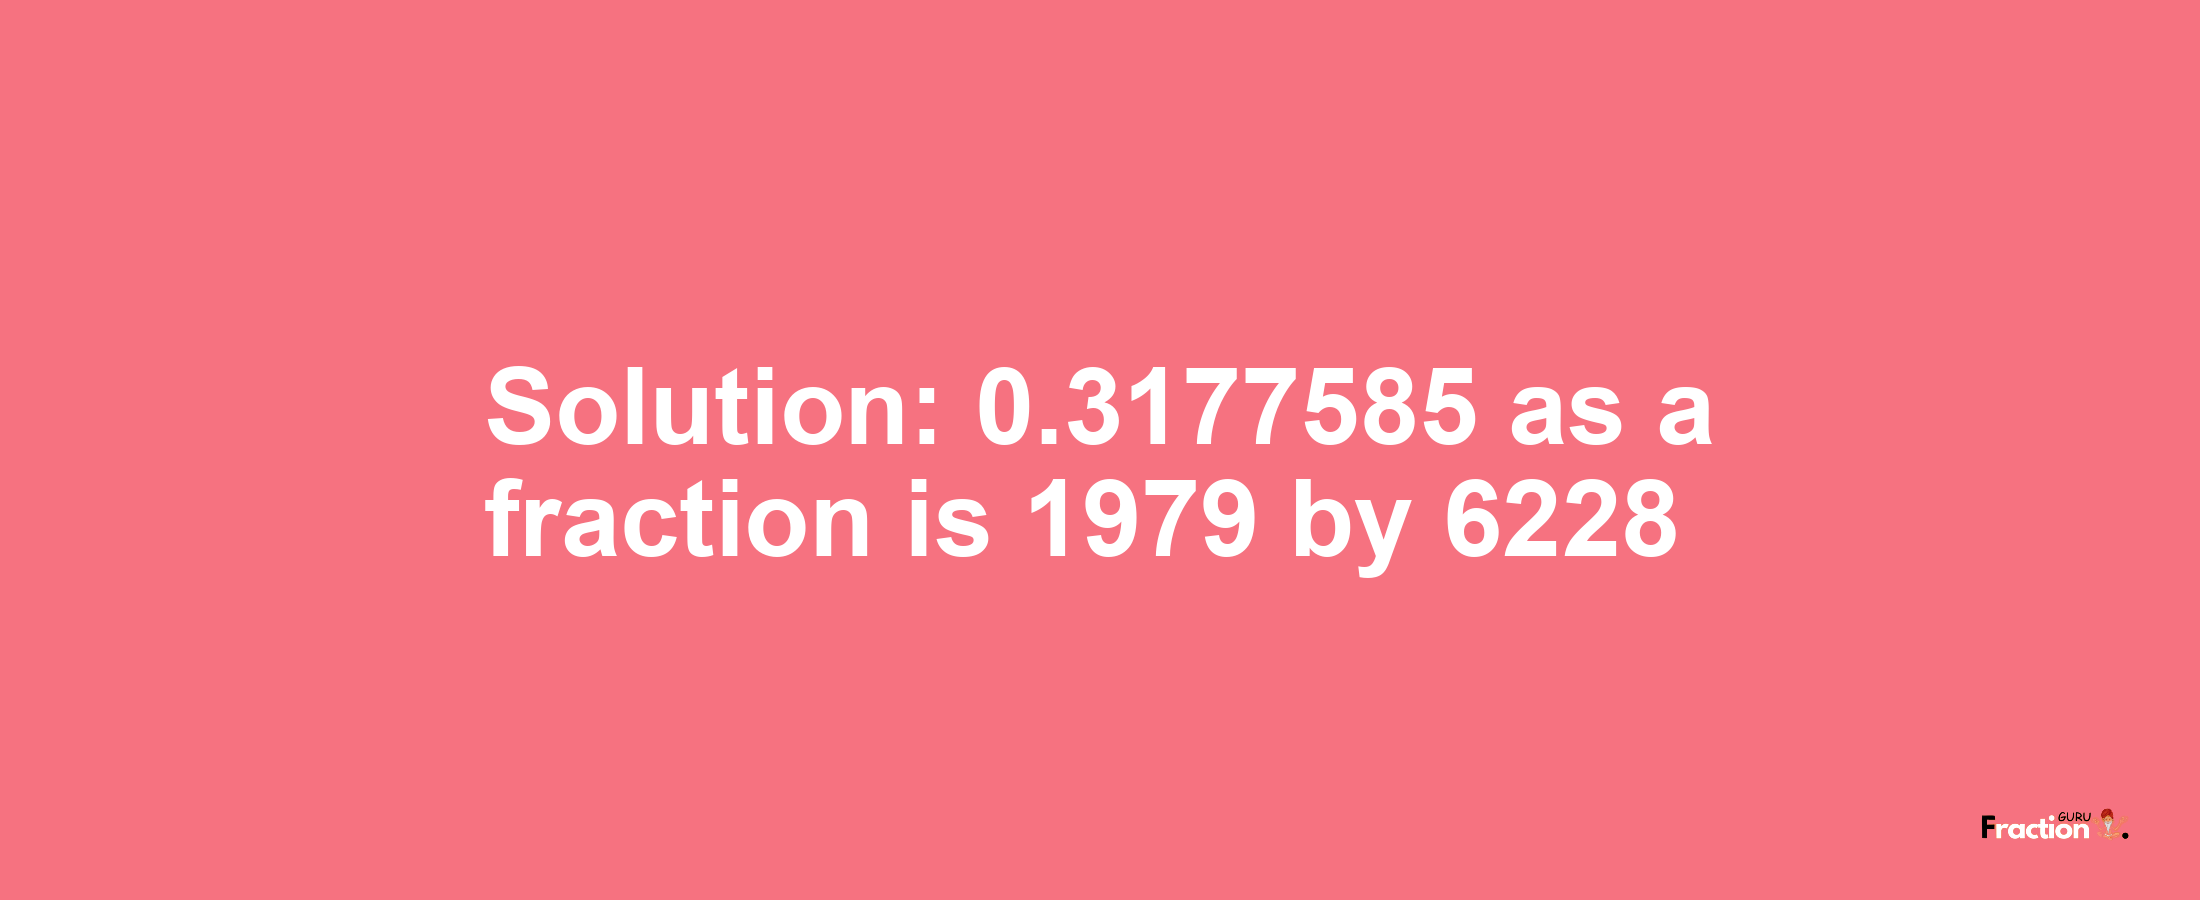 Solution:0.3177585 as a fraction is 1979/6228